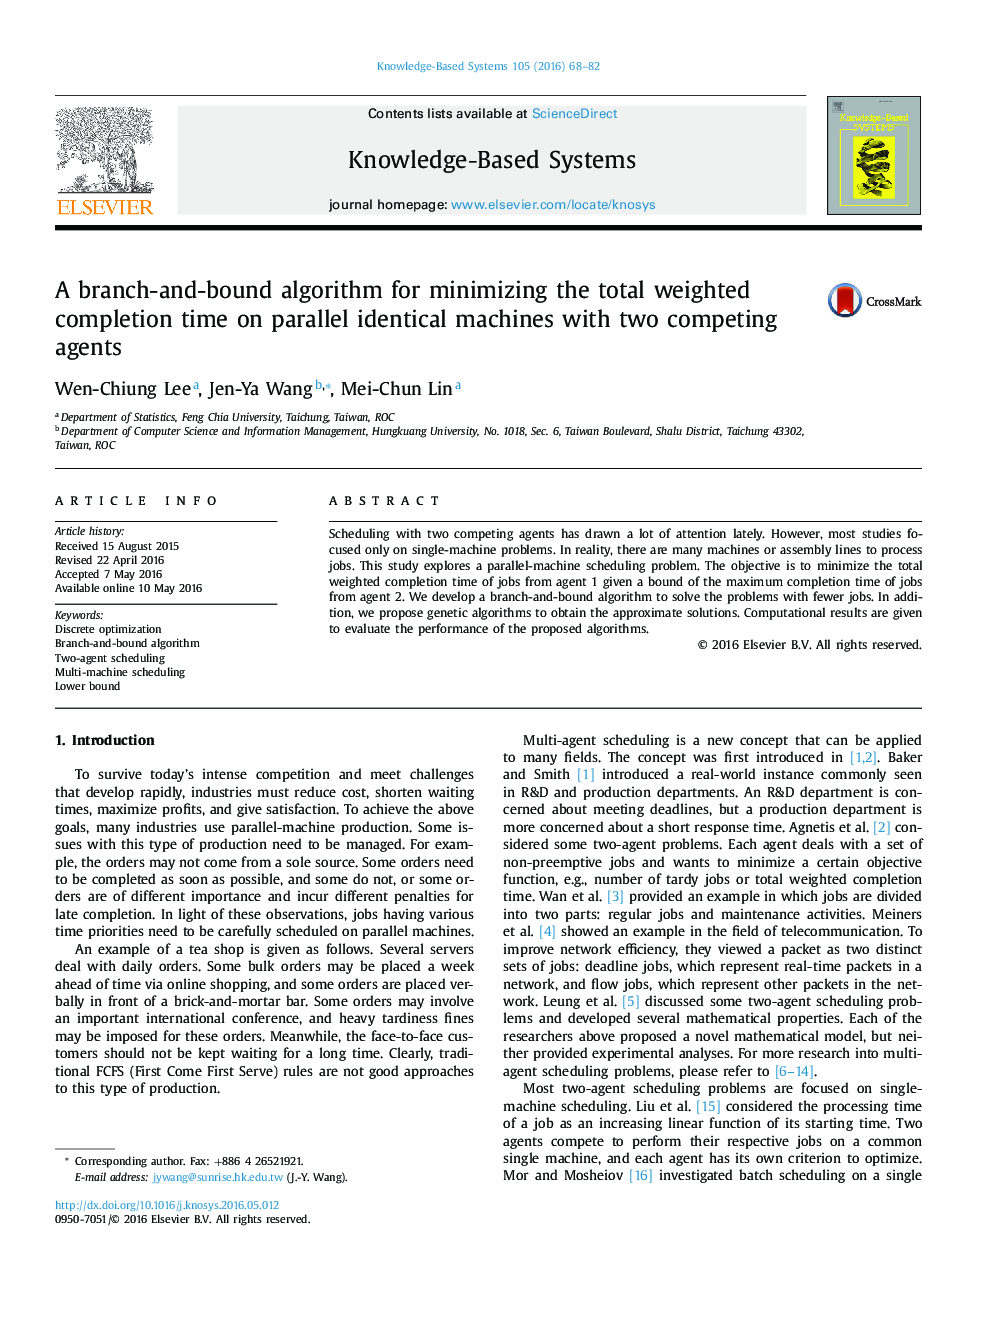 A branch-and-bound algorithm for minimizing the total weighted completion time on parallel identical machines with two competing agents